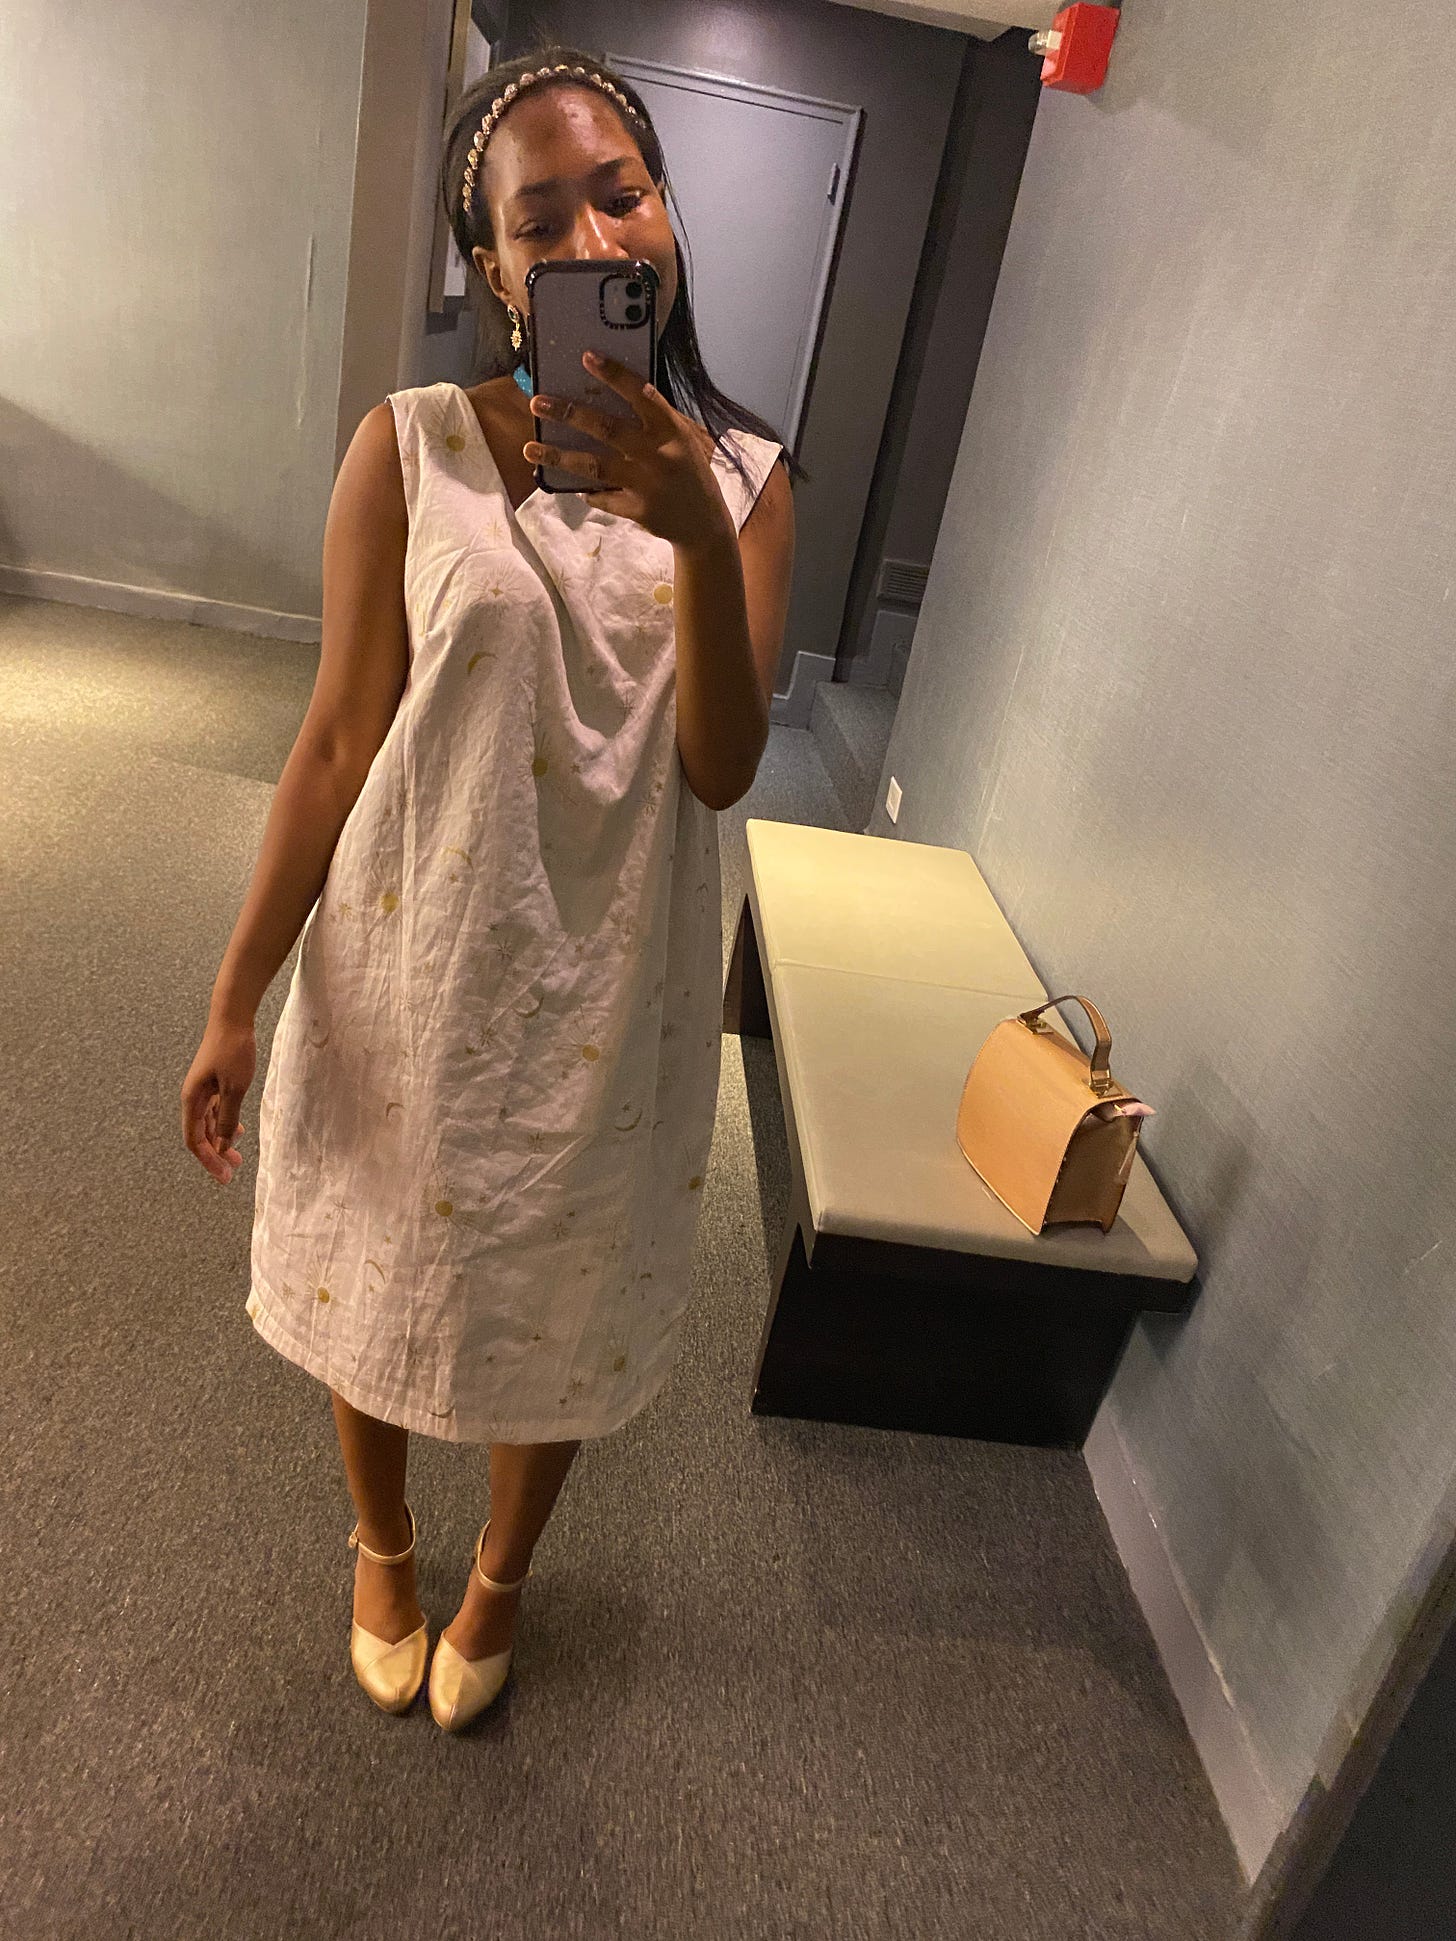 mirror selfie of a young woman wearing a white dress with gold moons and stars on it. The neckline is made of two v's. Behind her is her pink purse on a bench. She holds a lilac iphone with a transparent case